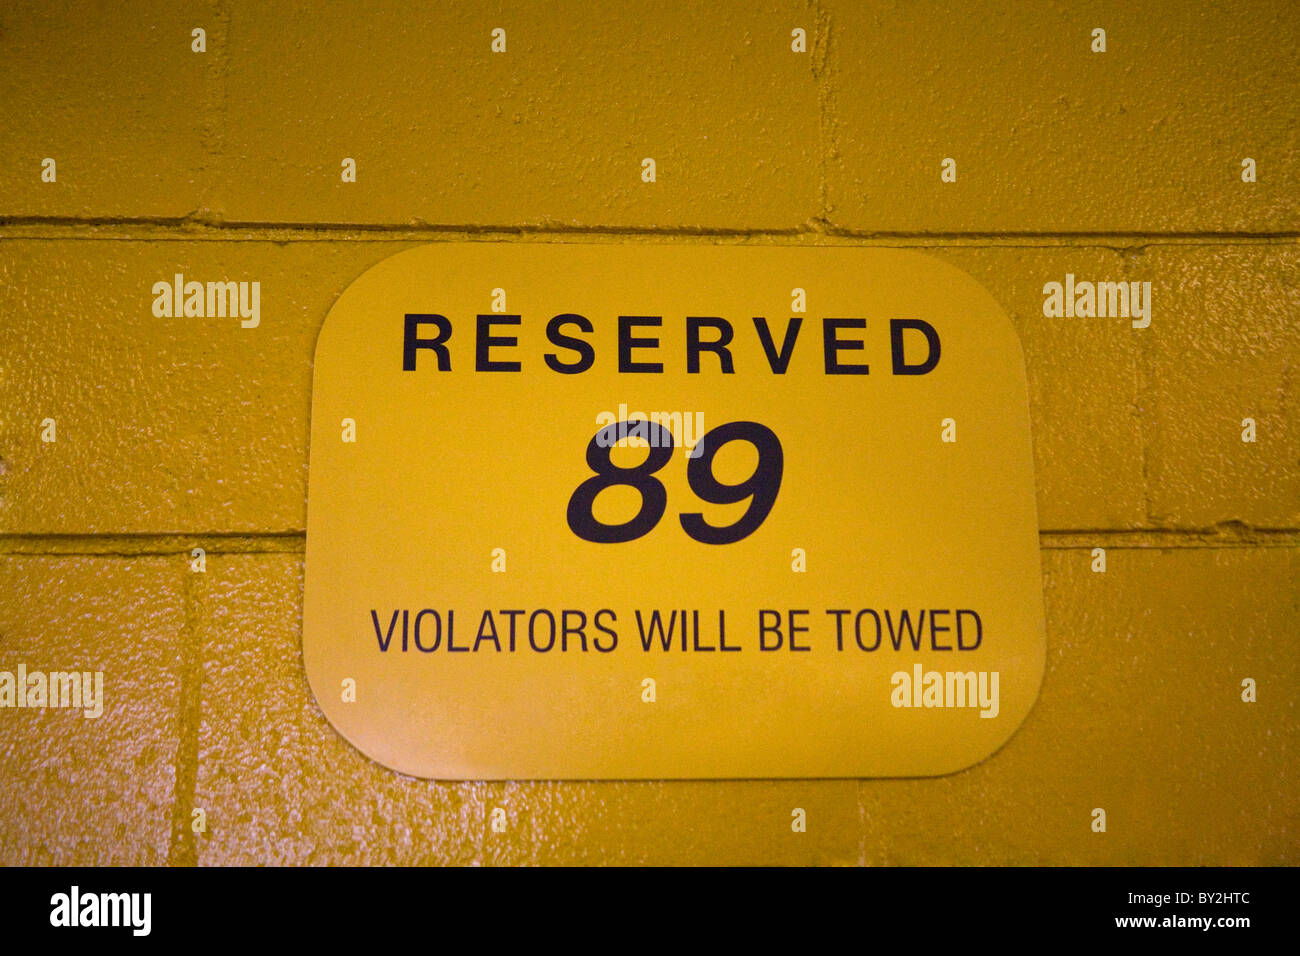 Reserved yellow parking space sign with numbers Stock Photo